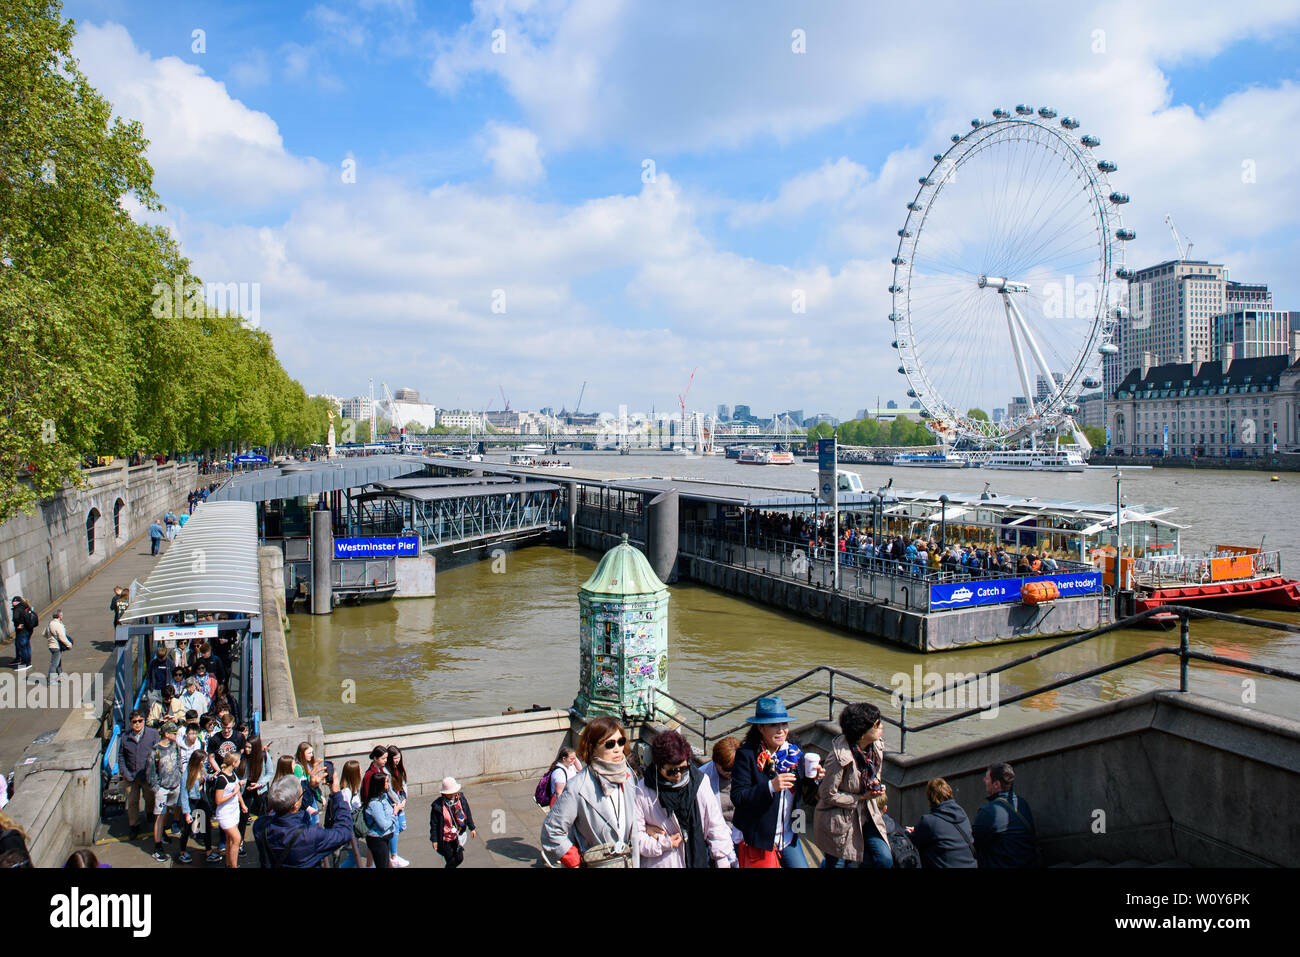 Westminster Millennium Pier on the north bank of the River Thames with London Eye at background in London, United Kingdom Stock Photo